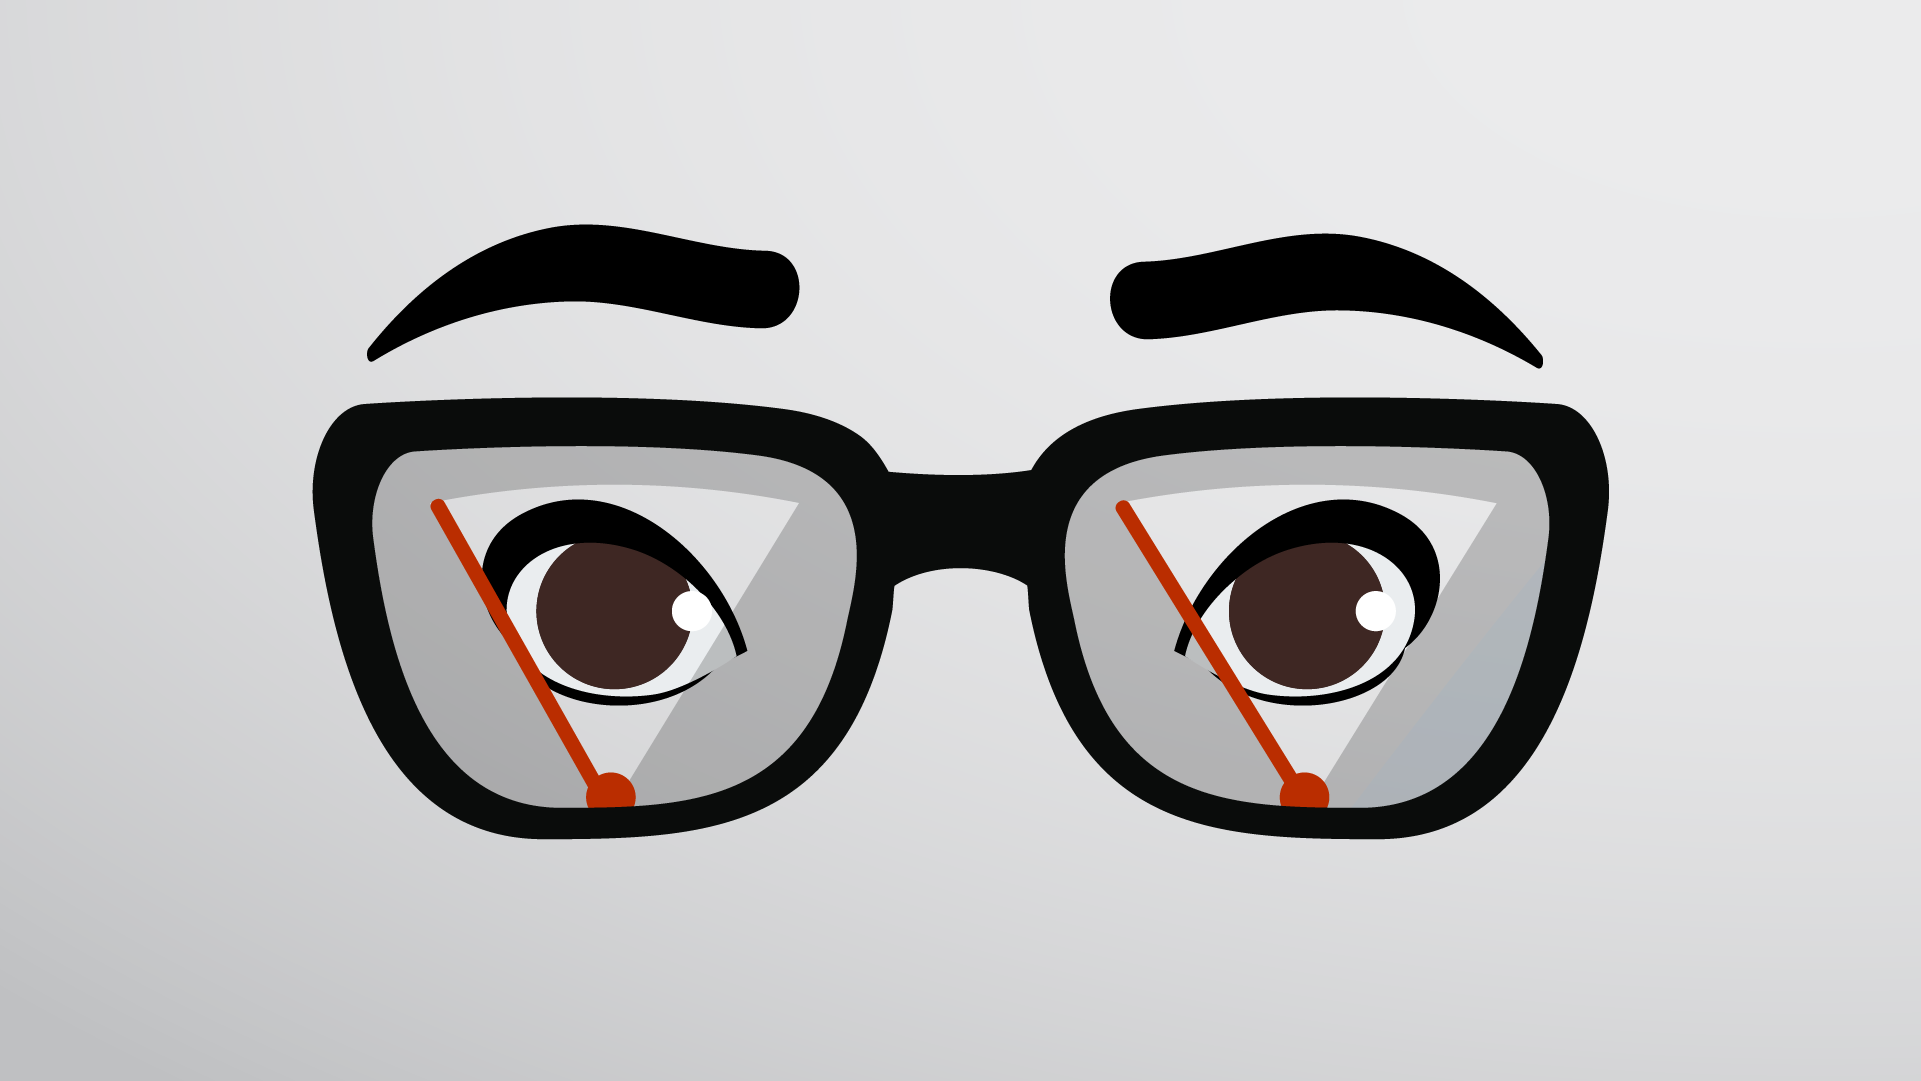 Illustration of glasses with windshield wipers